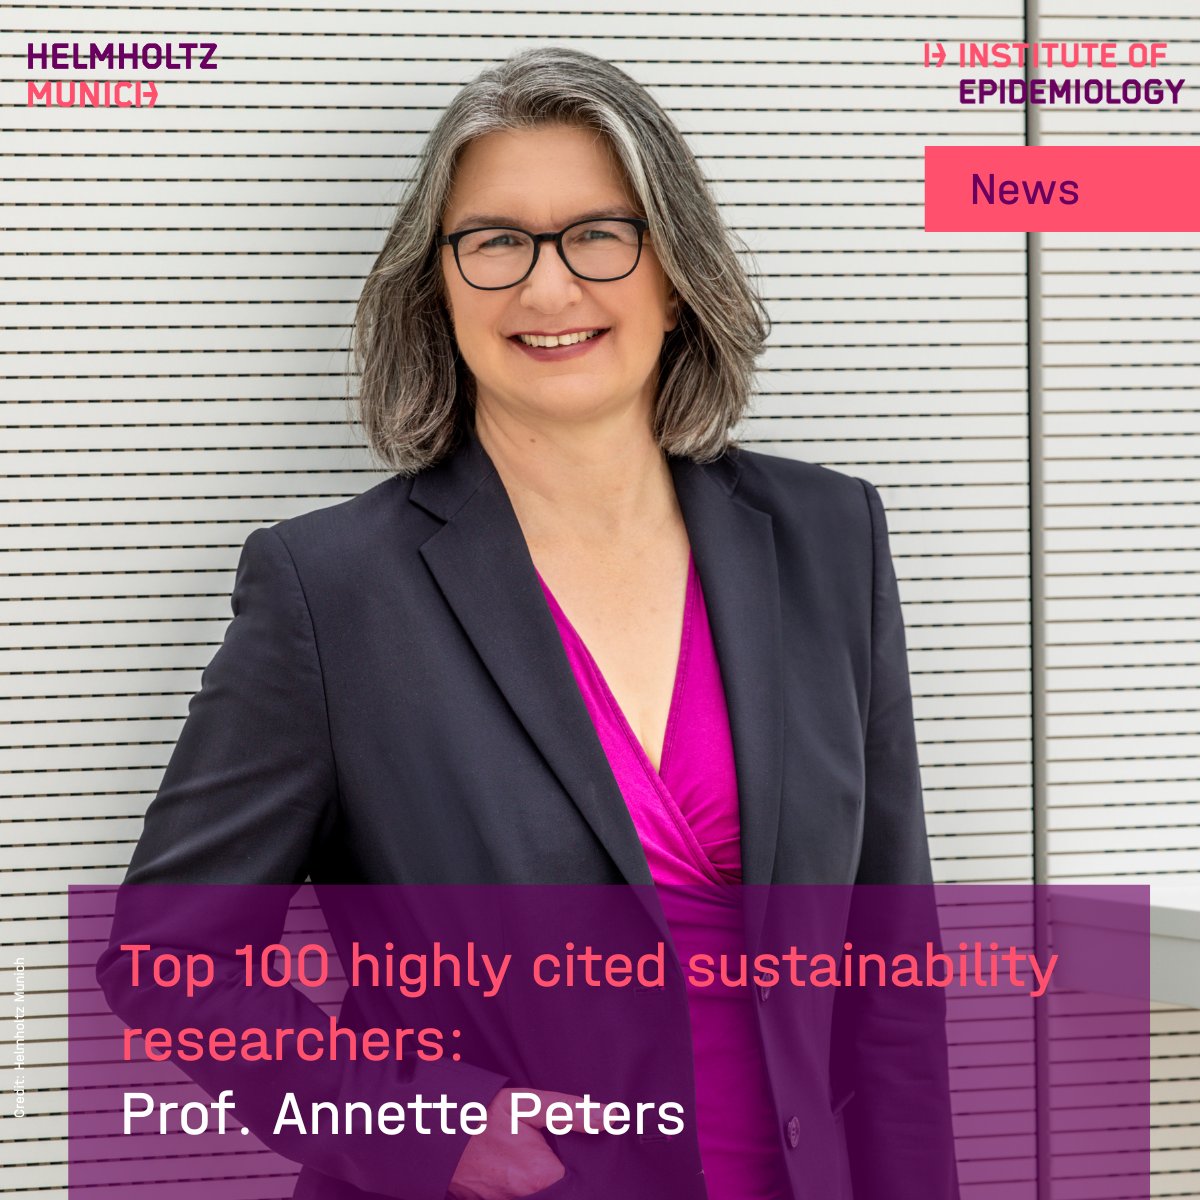 Congratulations to Prof. Annette Peters, Director of the Institute of #Epidemiology at #HelmholtzMunich, as one of the 100 highly cited sustainability researchers & as one of the select 7 #women! 👏 👉More: t1p.de/fw47w #SGDs #health #pollution #womeninscience